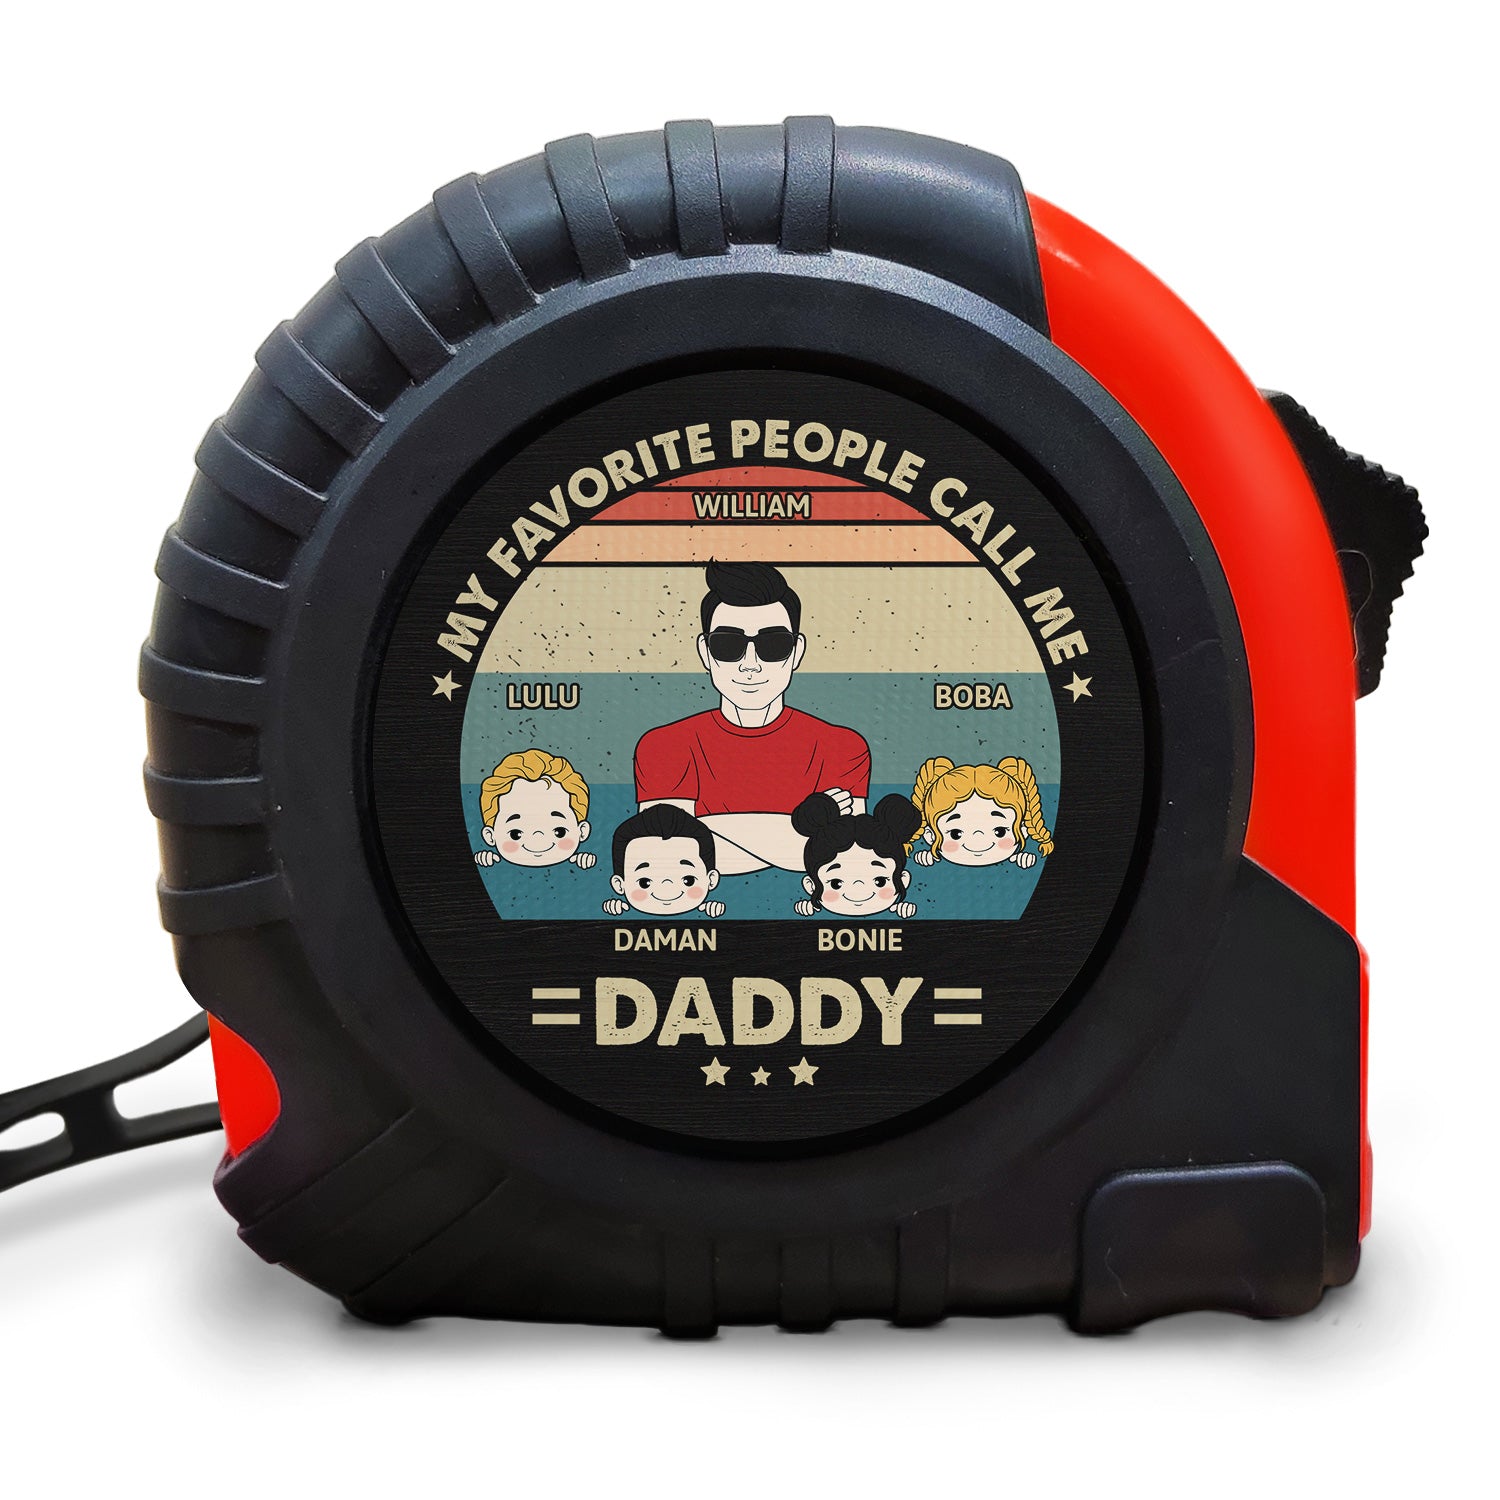 My Favorite People Call Me - Gift For Dad, Father, Grandfather, Grandpa - Personalized Tape Measure